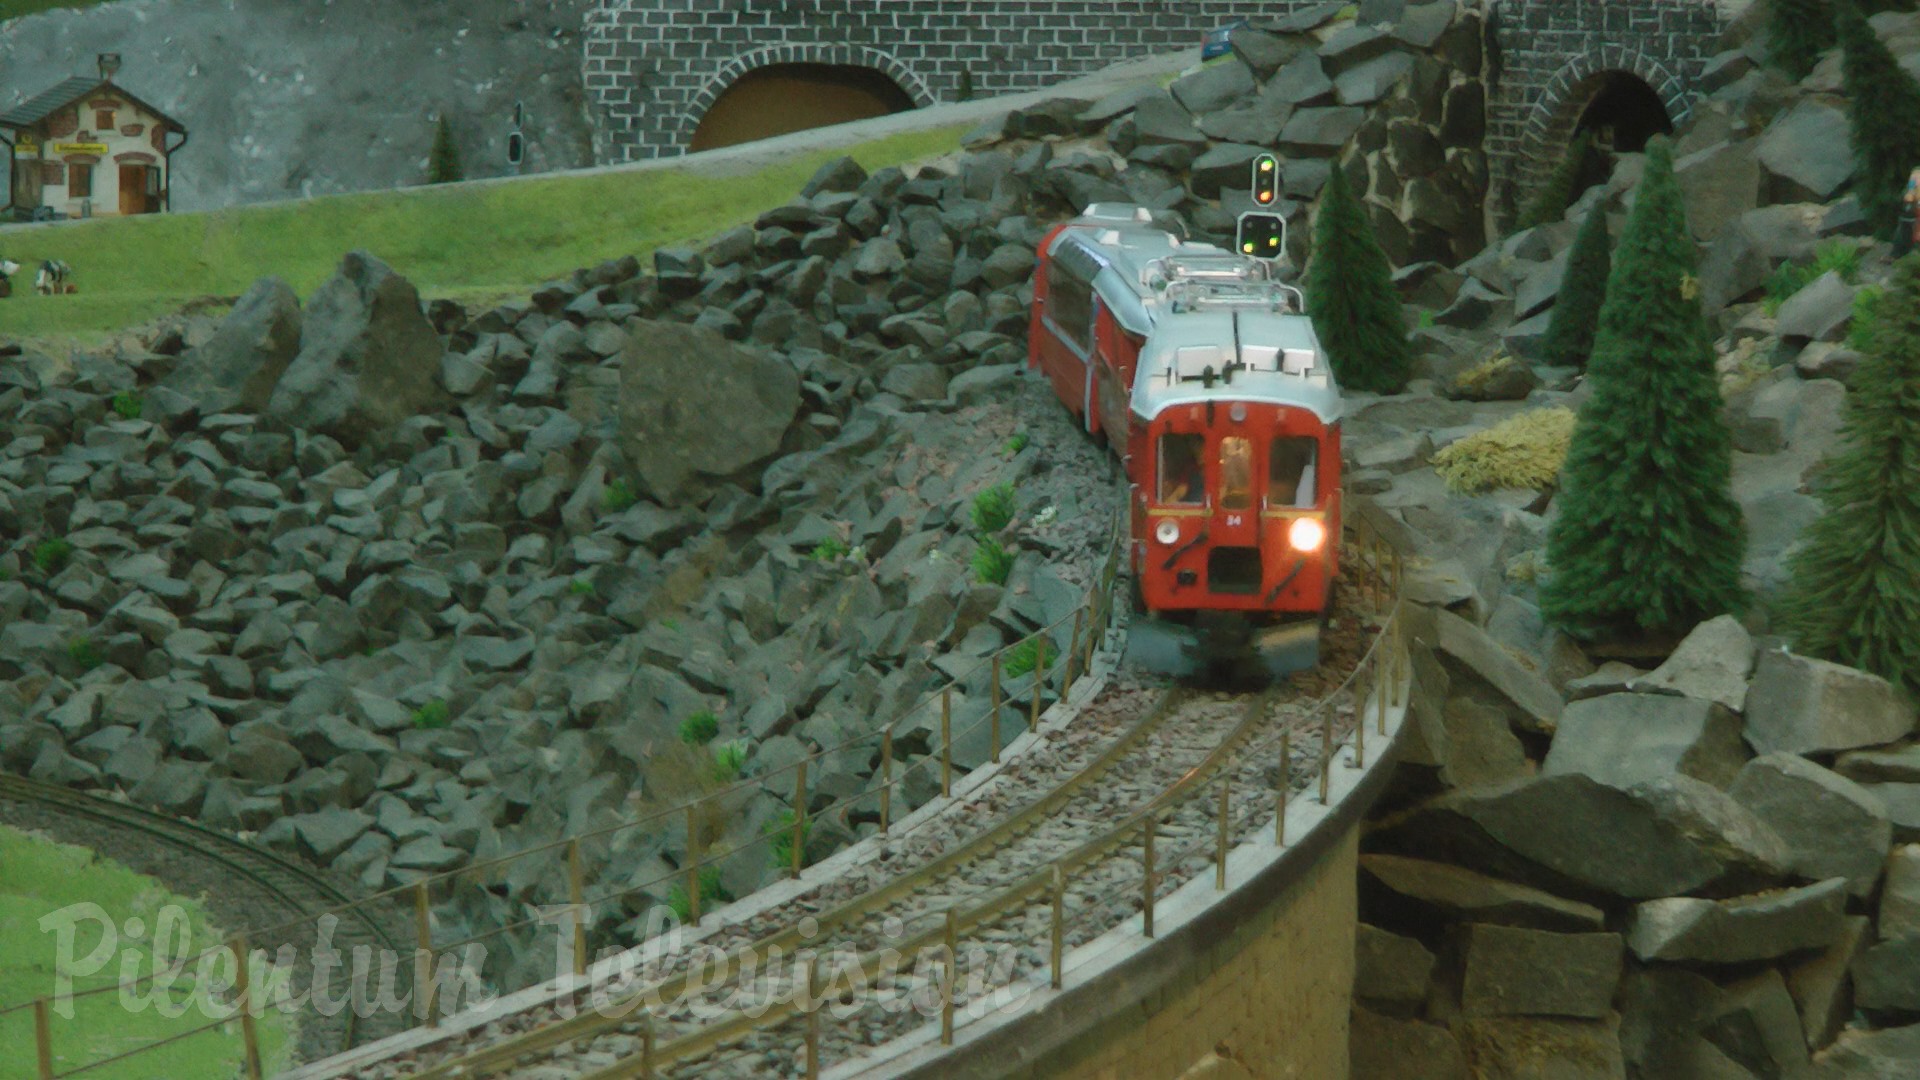 LGB Model Trains - Indoor Model Railroad Layout in G Scale